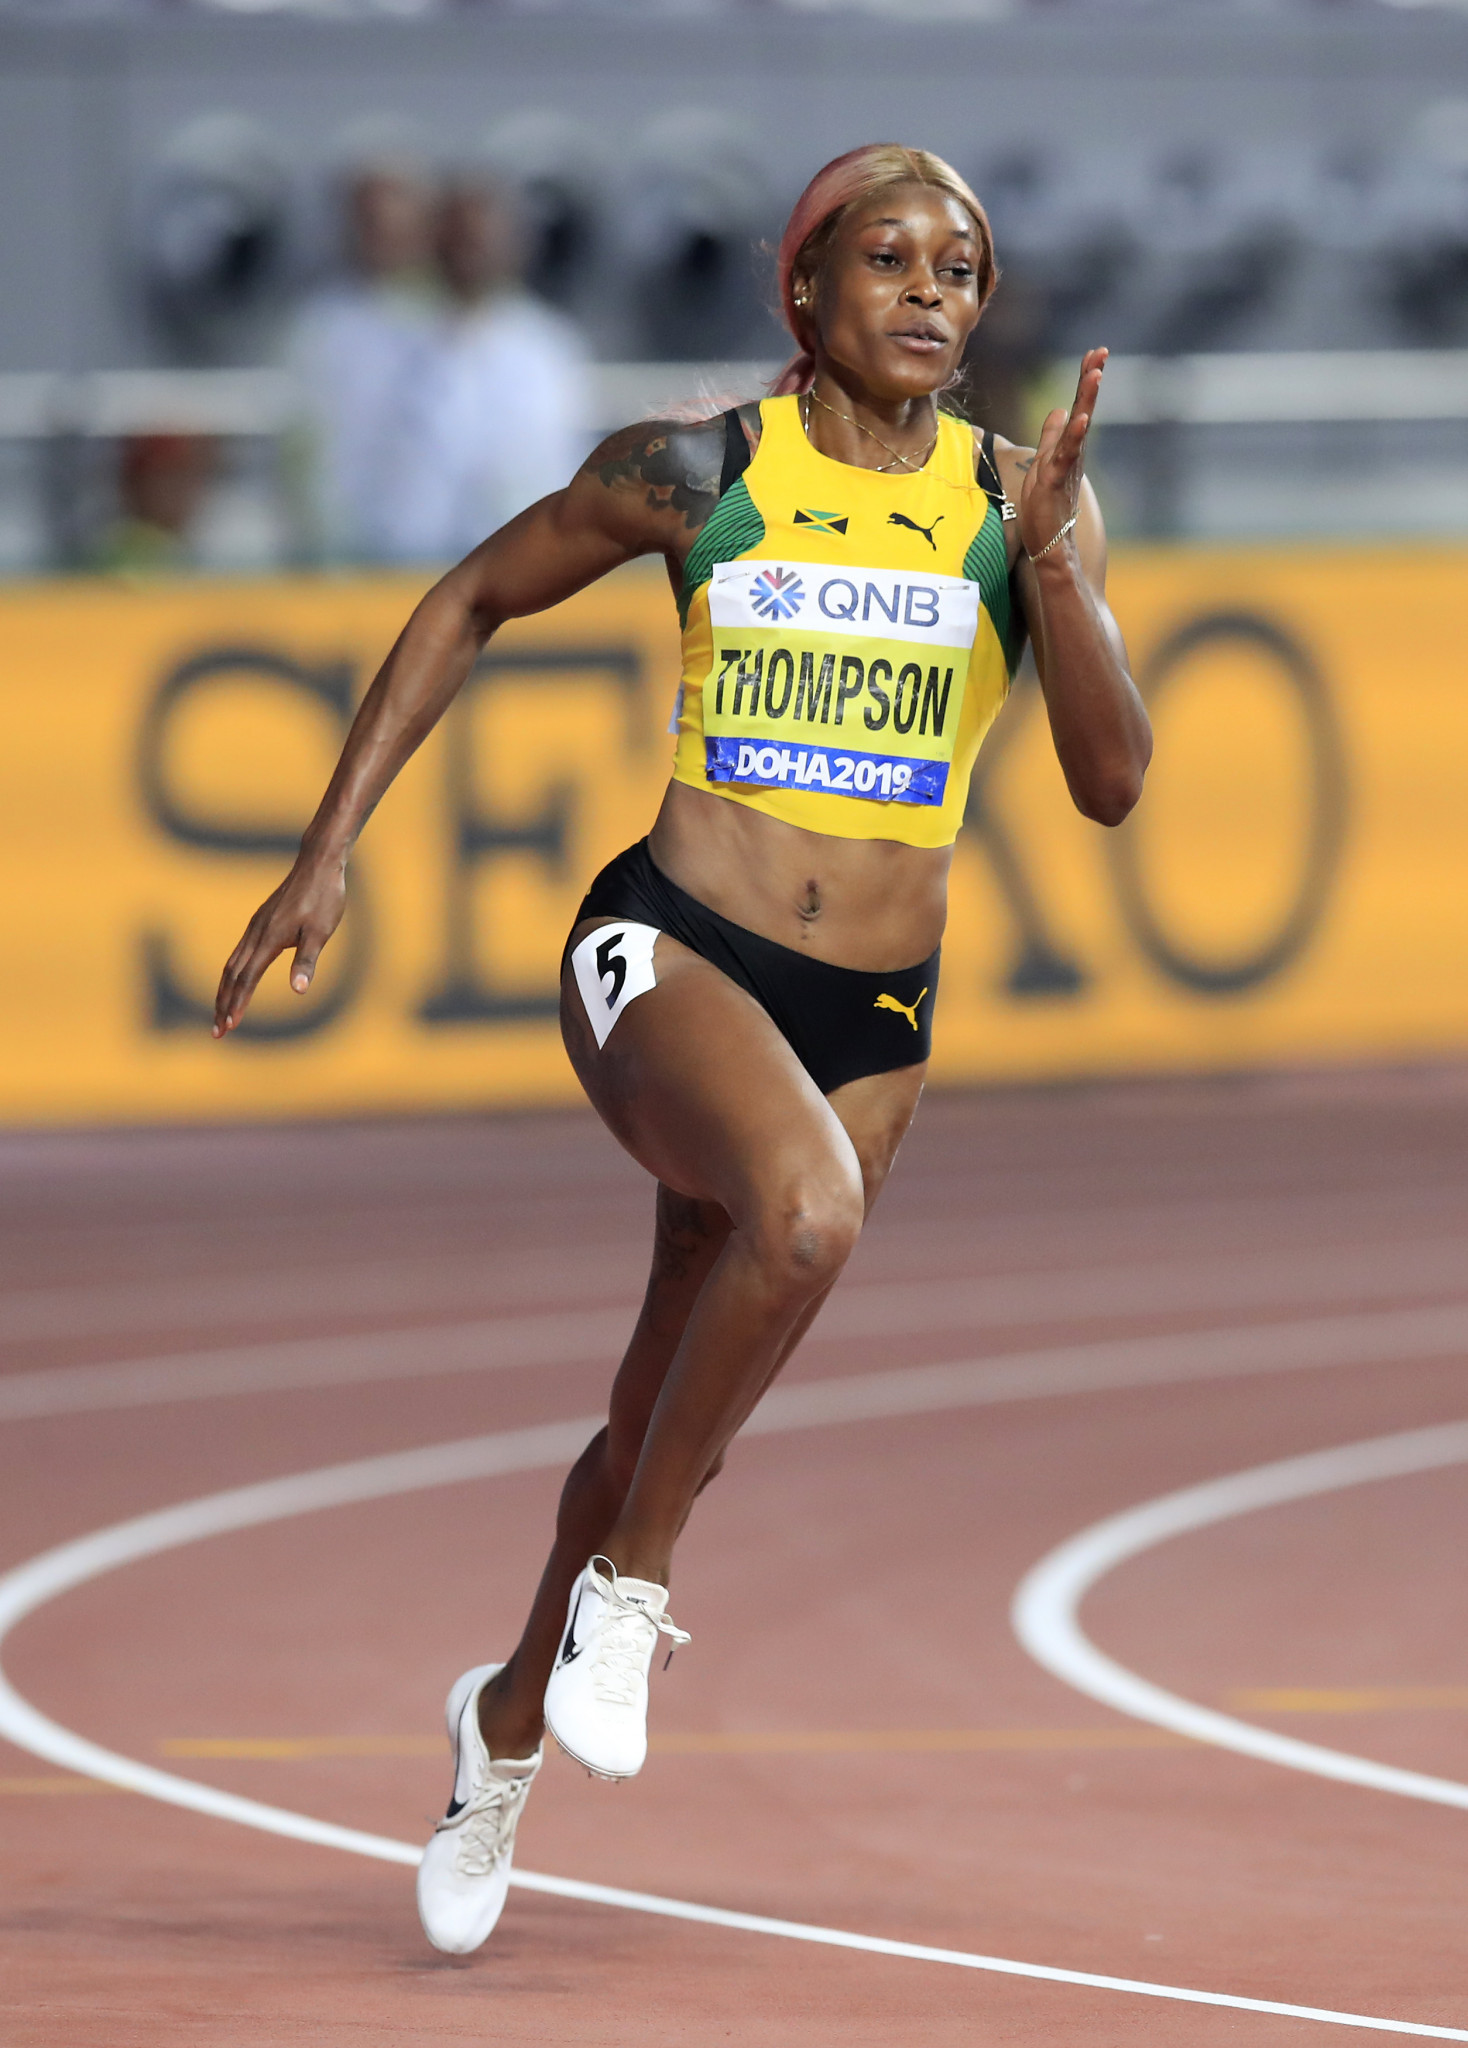 Jamaican team withdraw from World Athletics Relays over COVID-19 restrictions